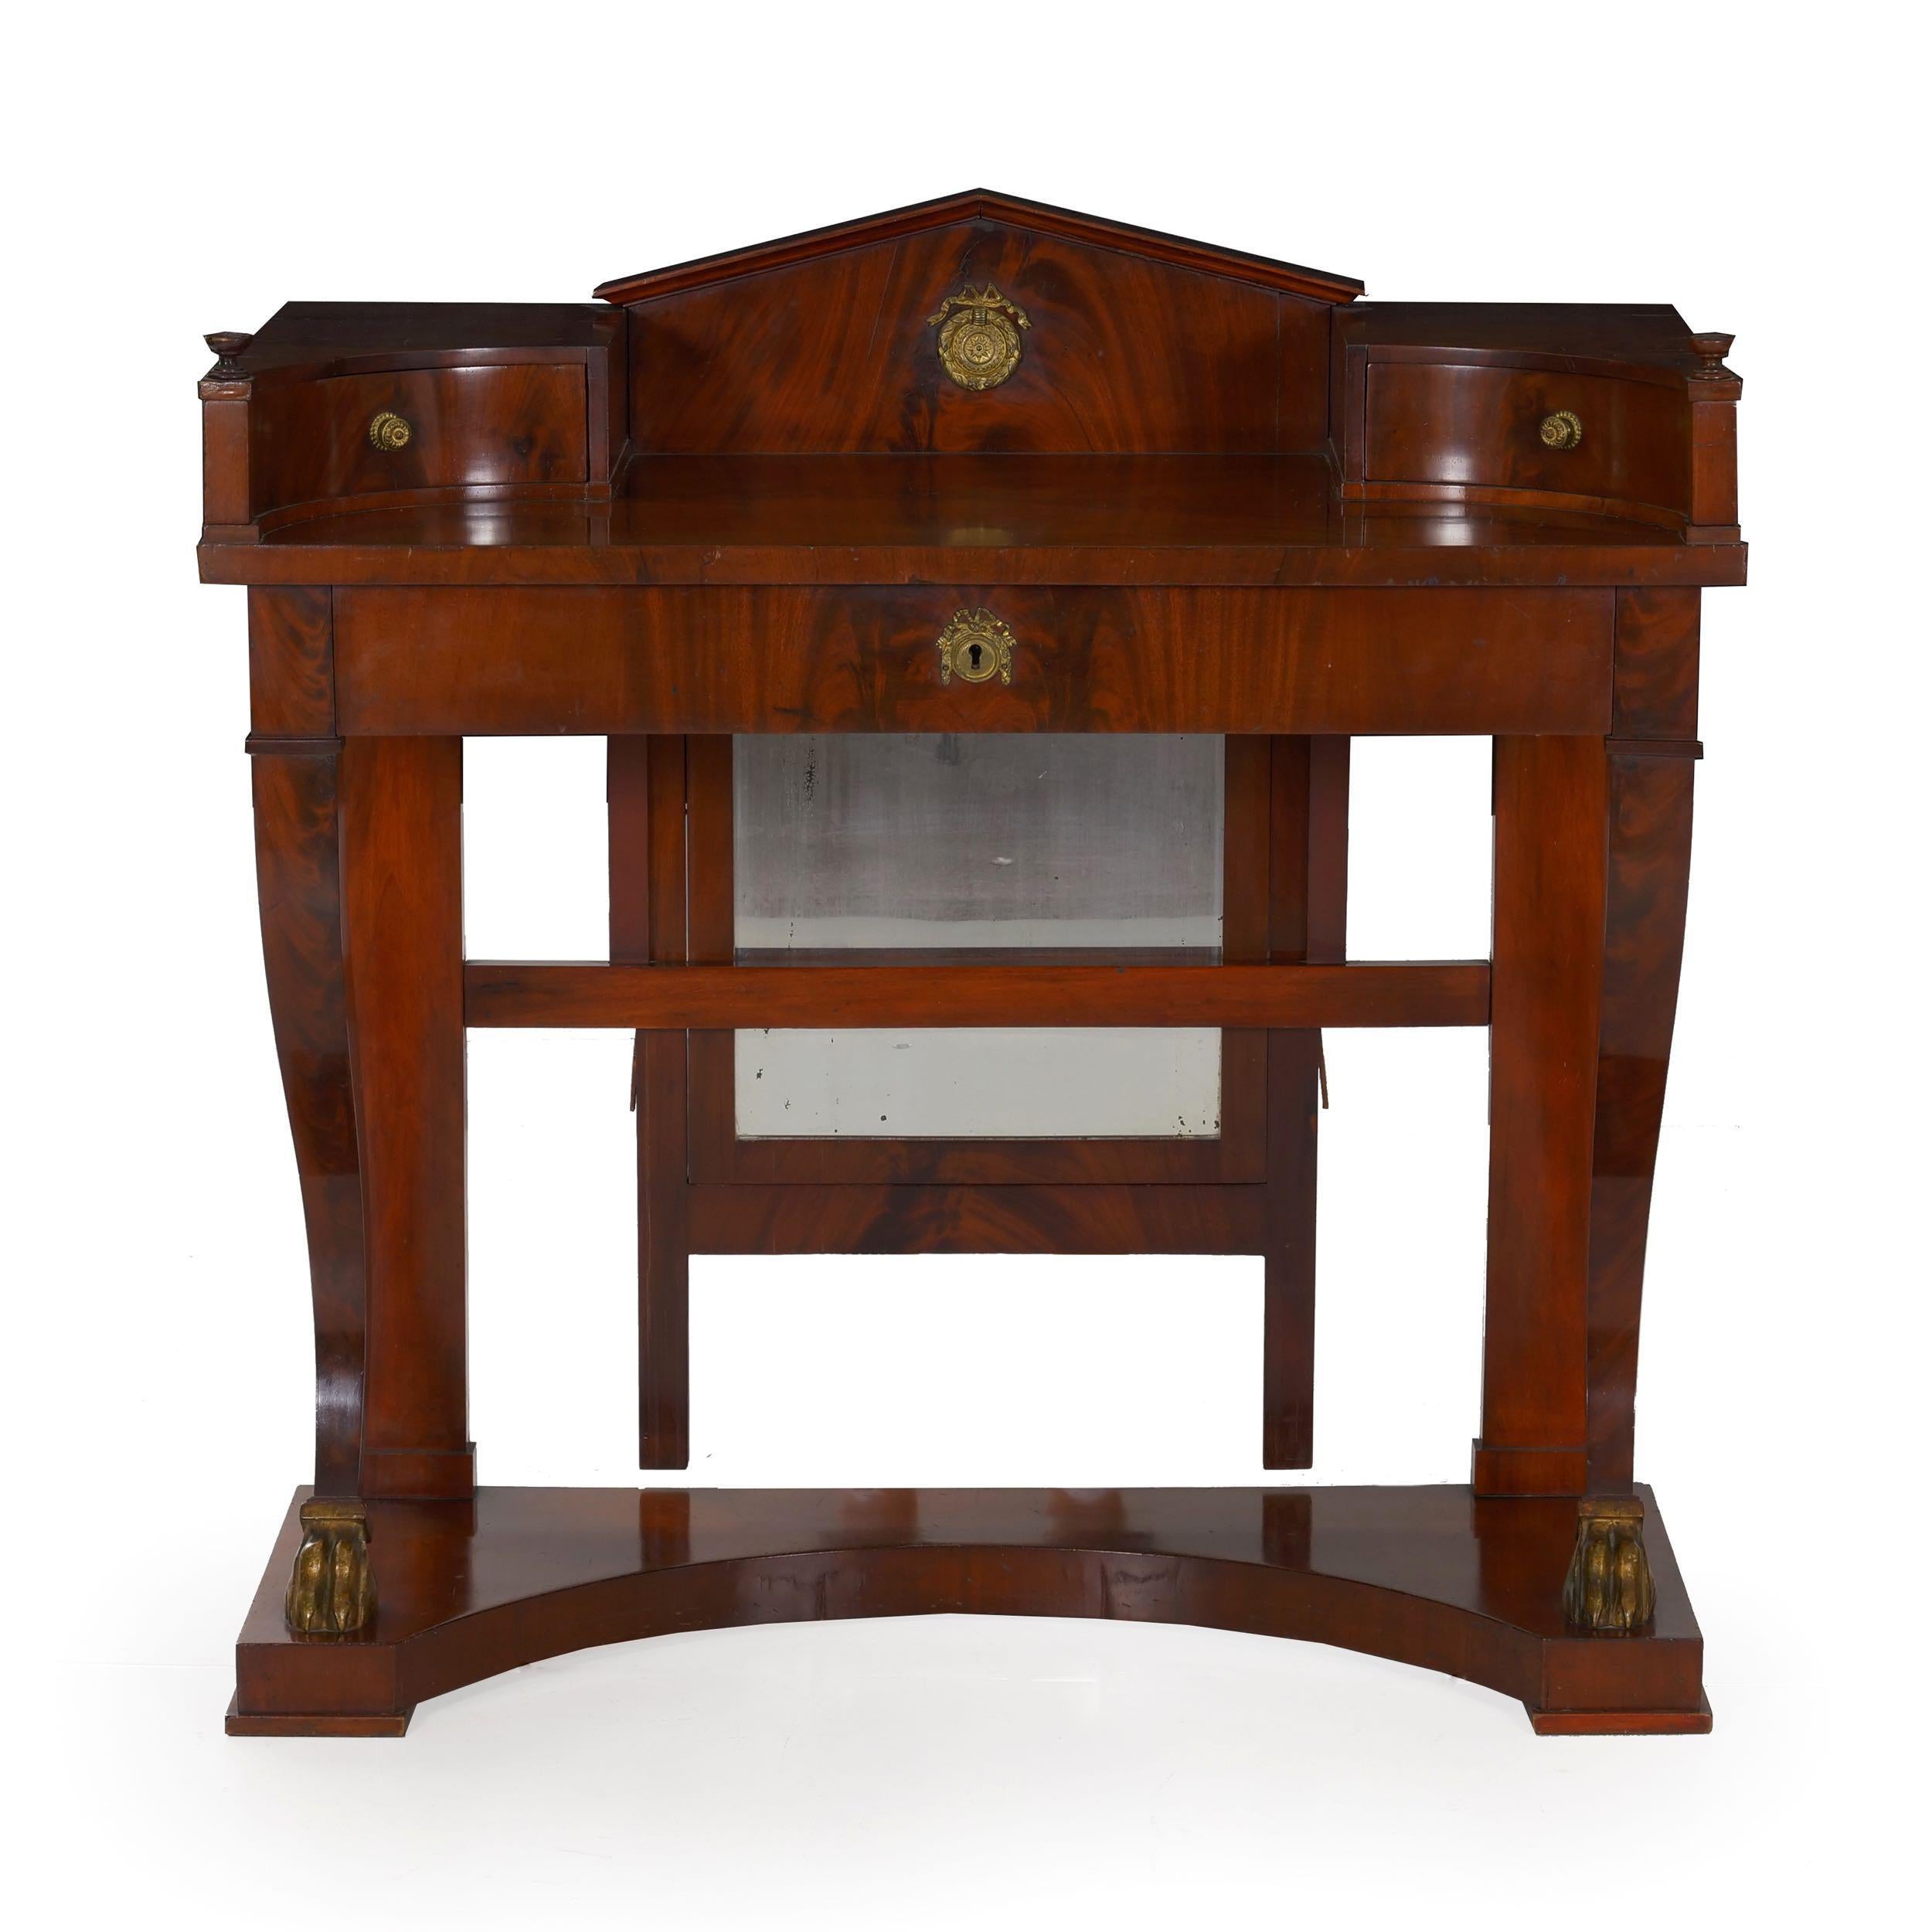 An unusual and incredibly attractive dressing table from the second quarter of the 19th century, this piece has been preserved in simply outstanding original condition. Retaining an early silky French polish, the dense flamed mahogany woods